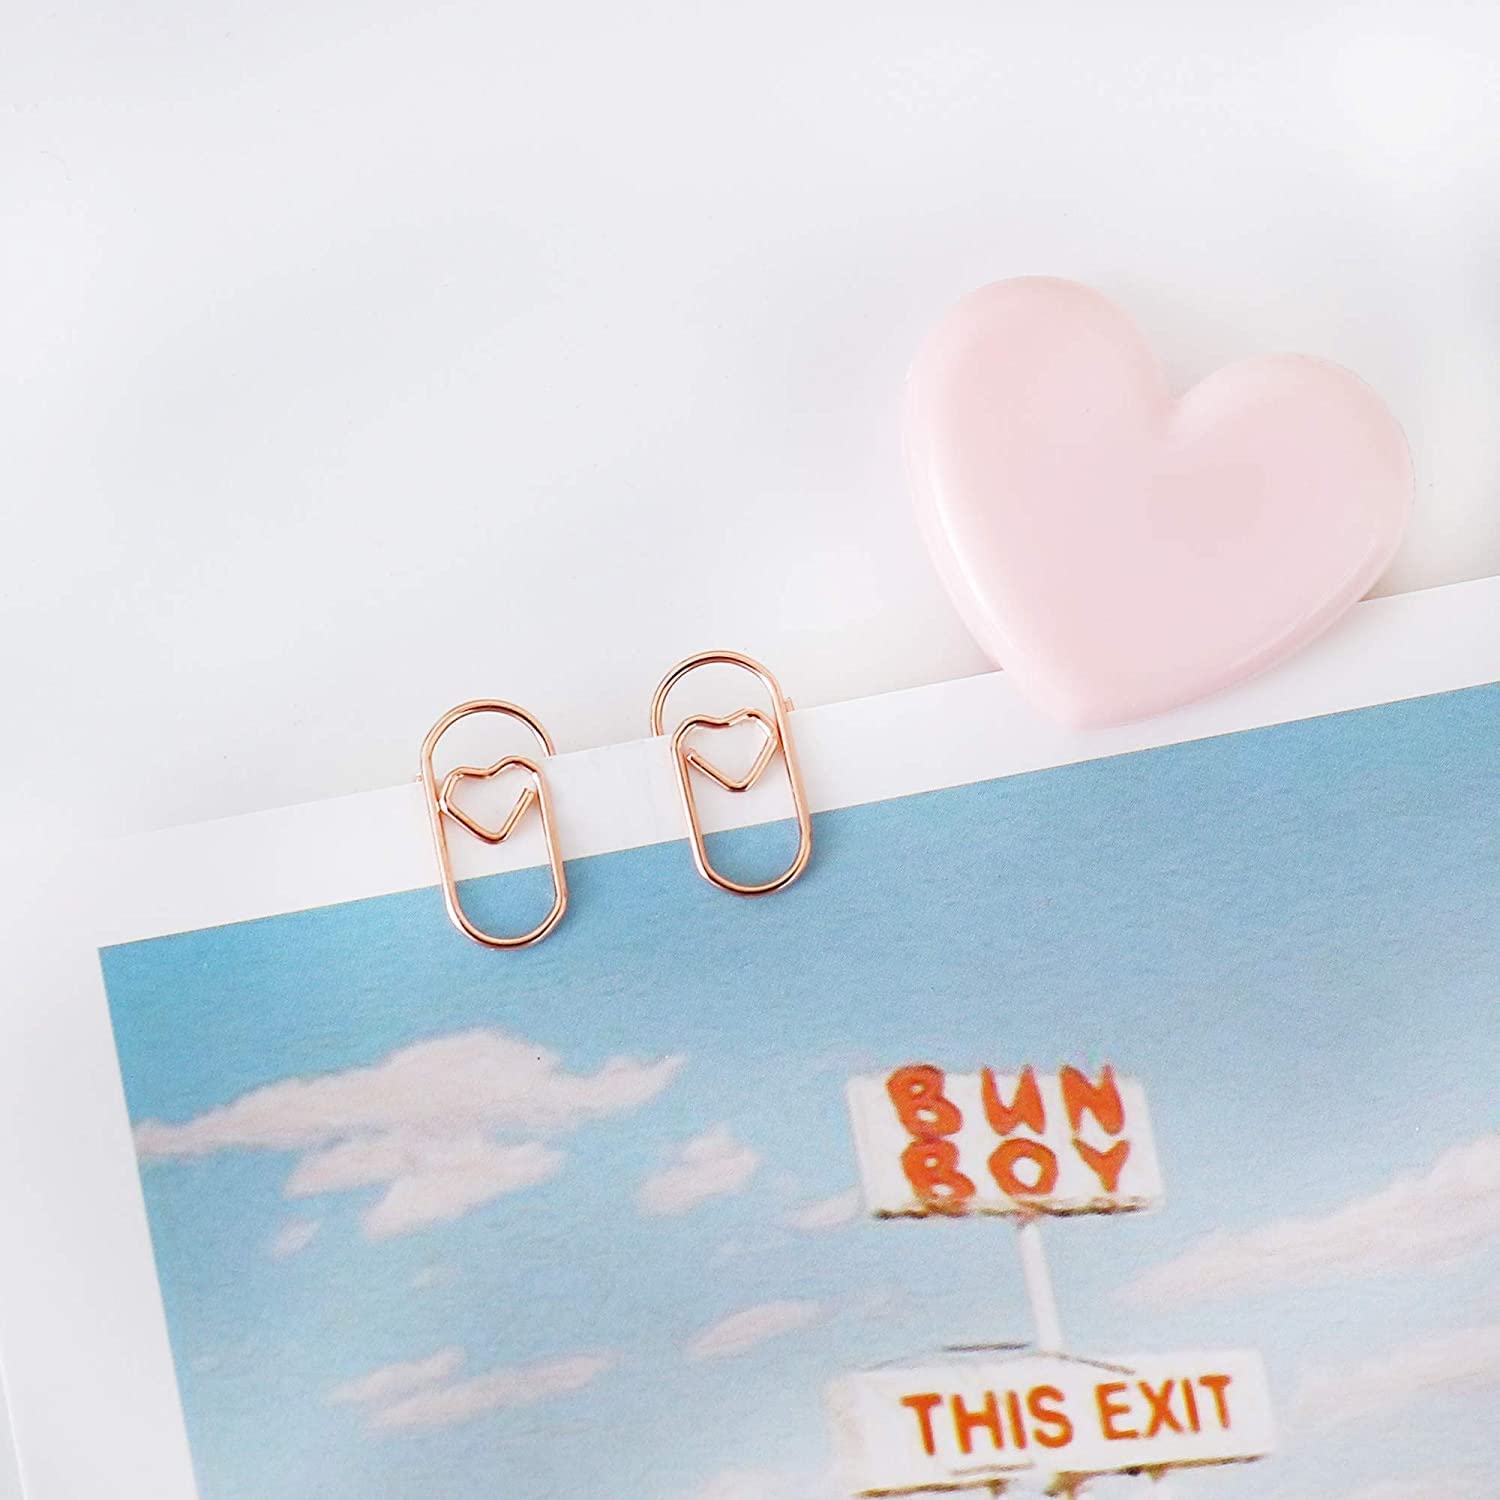 Heart shaped paper clips